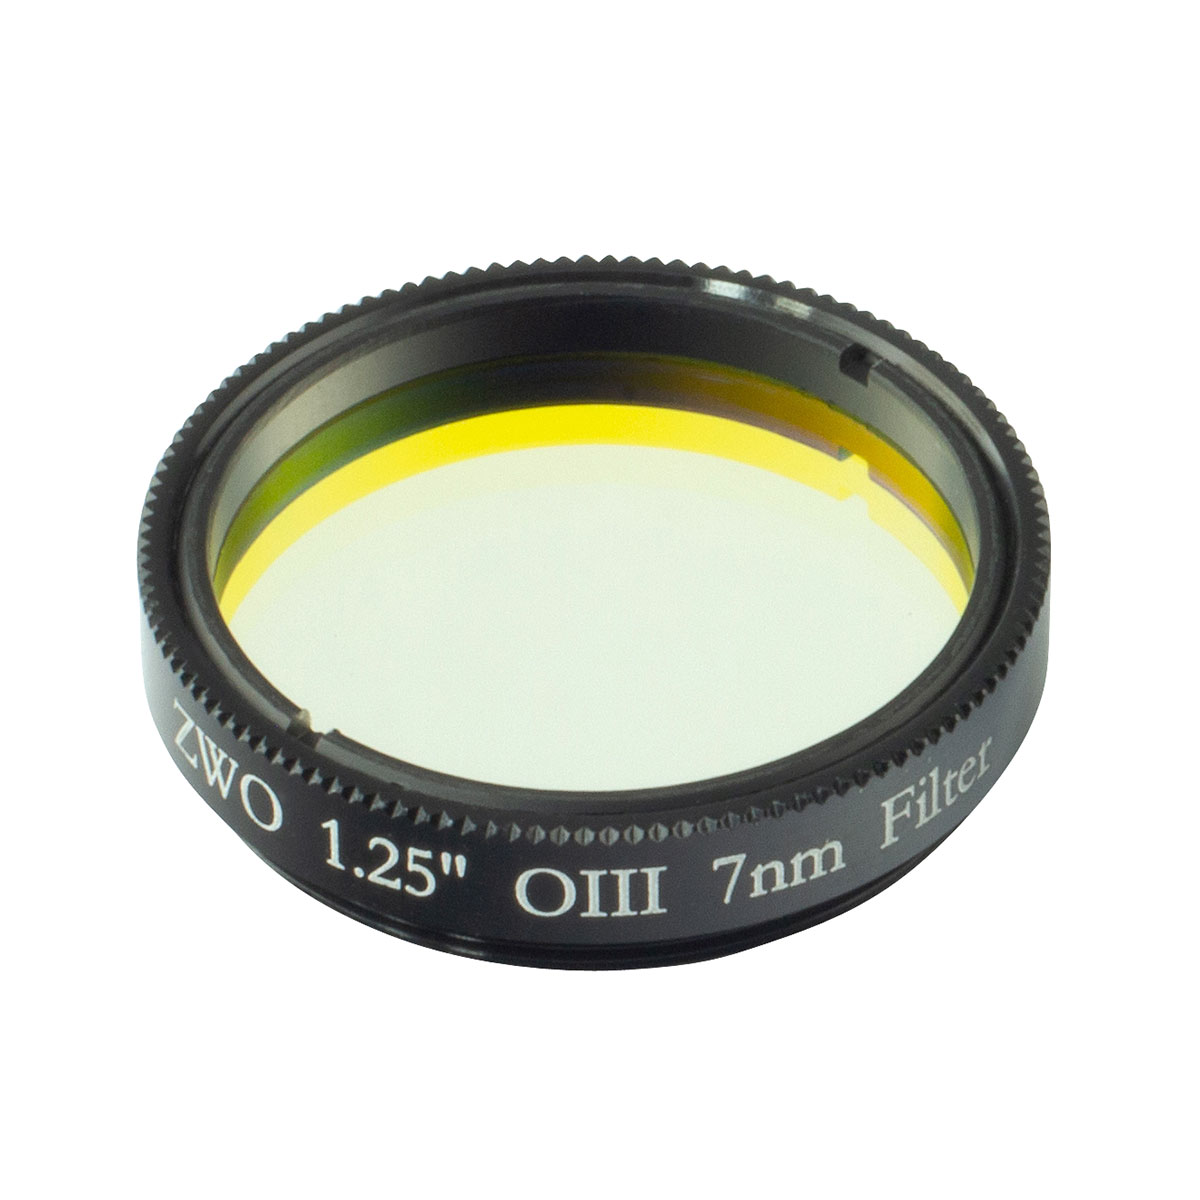 ZWO 1.25'' OIII 7nm Narrowband Filter